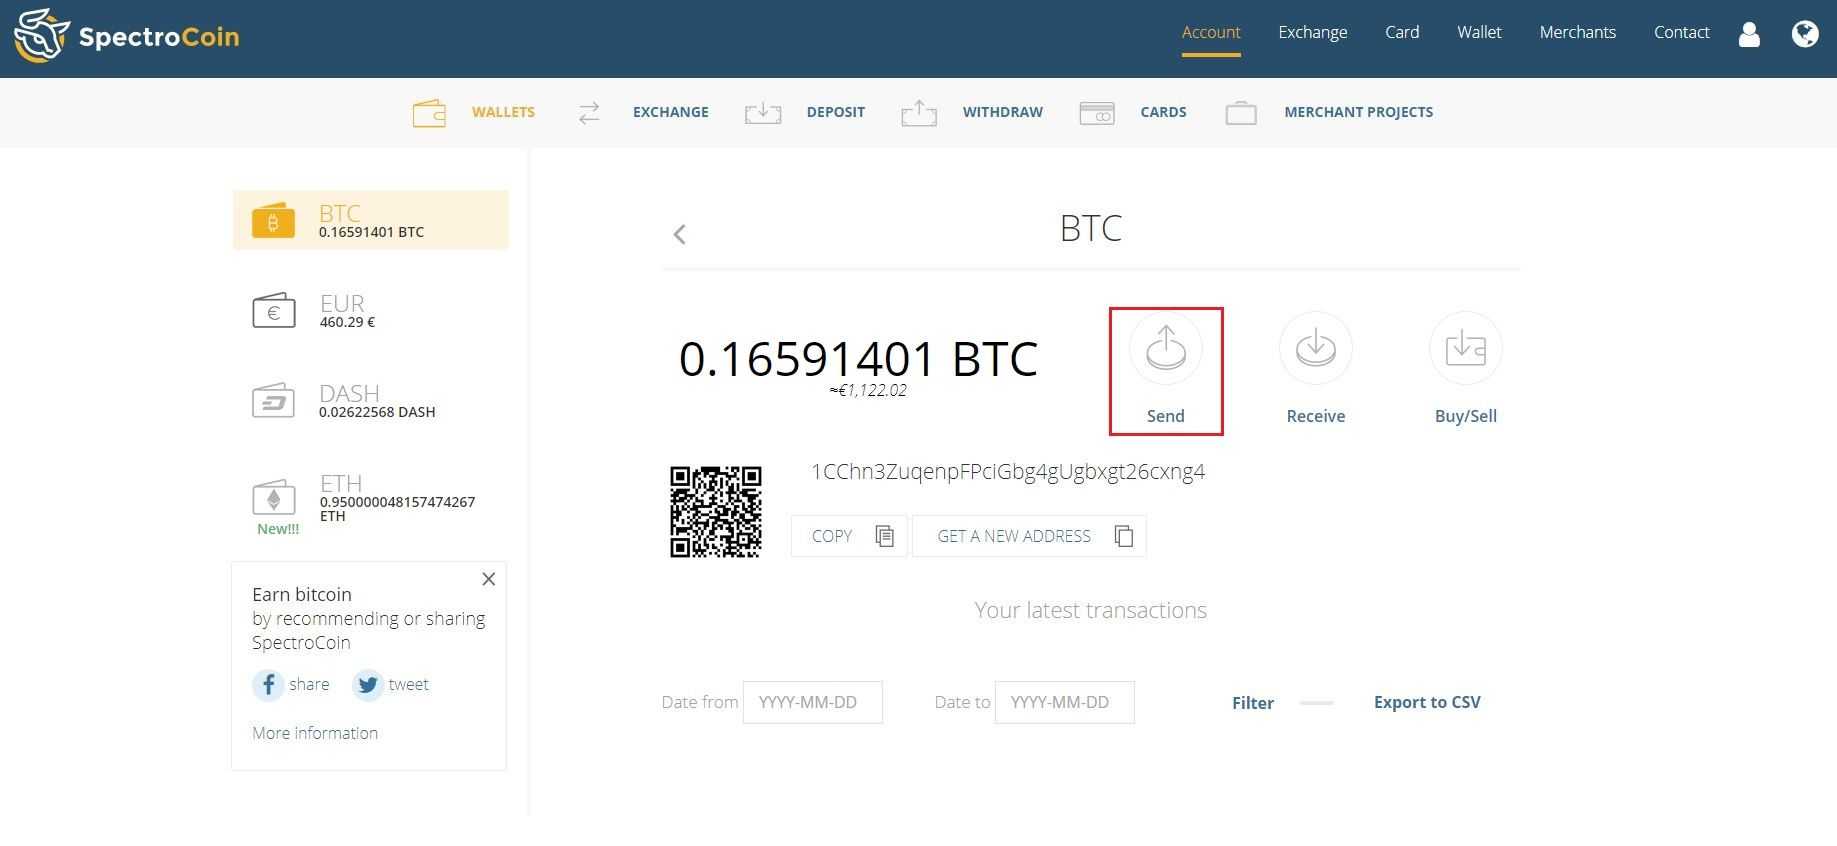 SpectroCoin BTC wallet page with "send" option